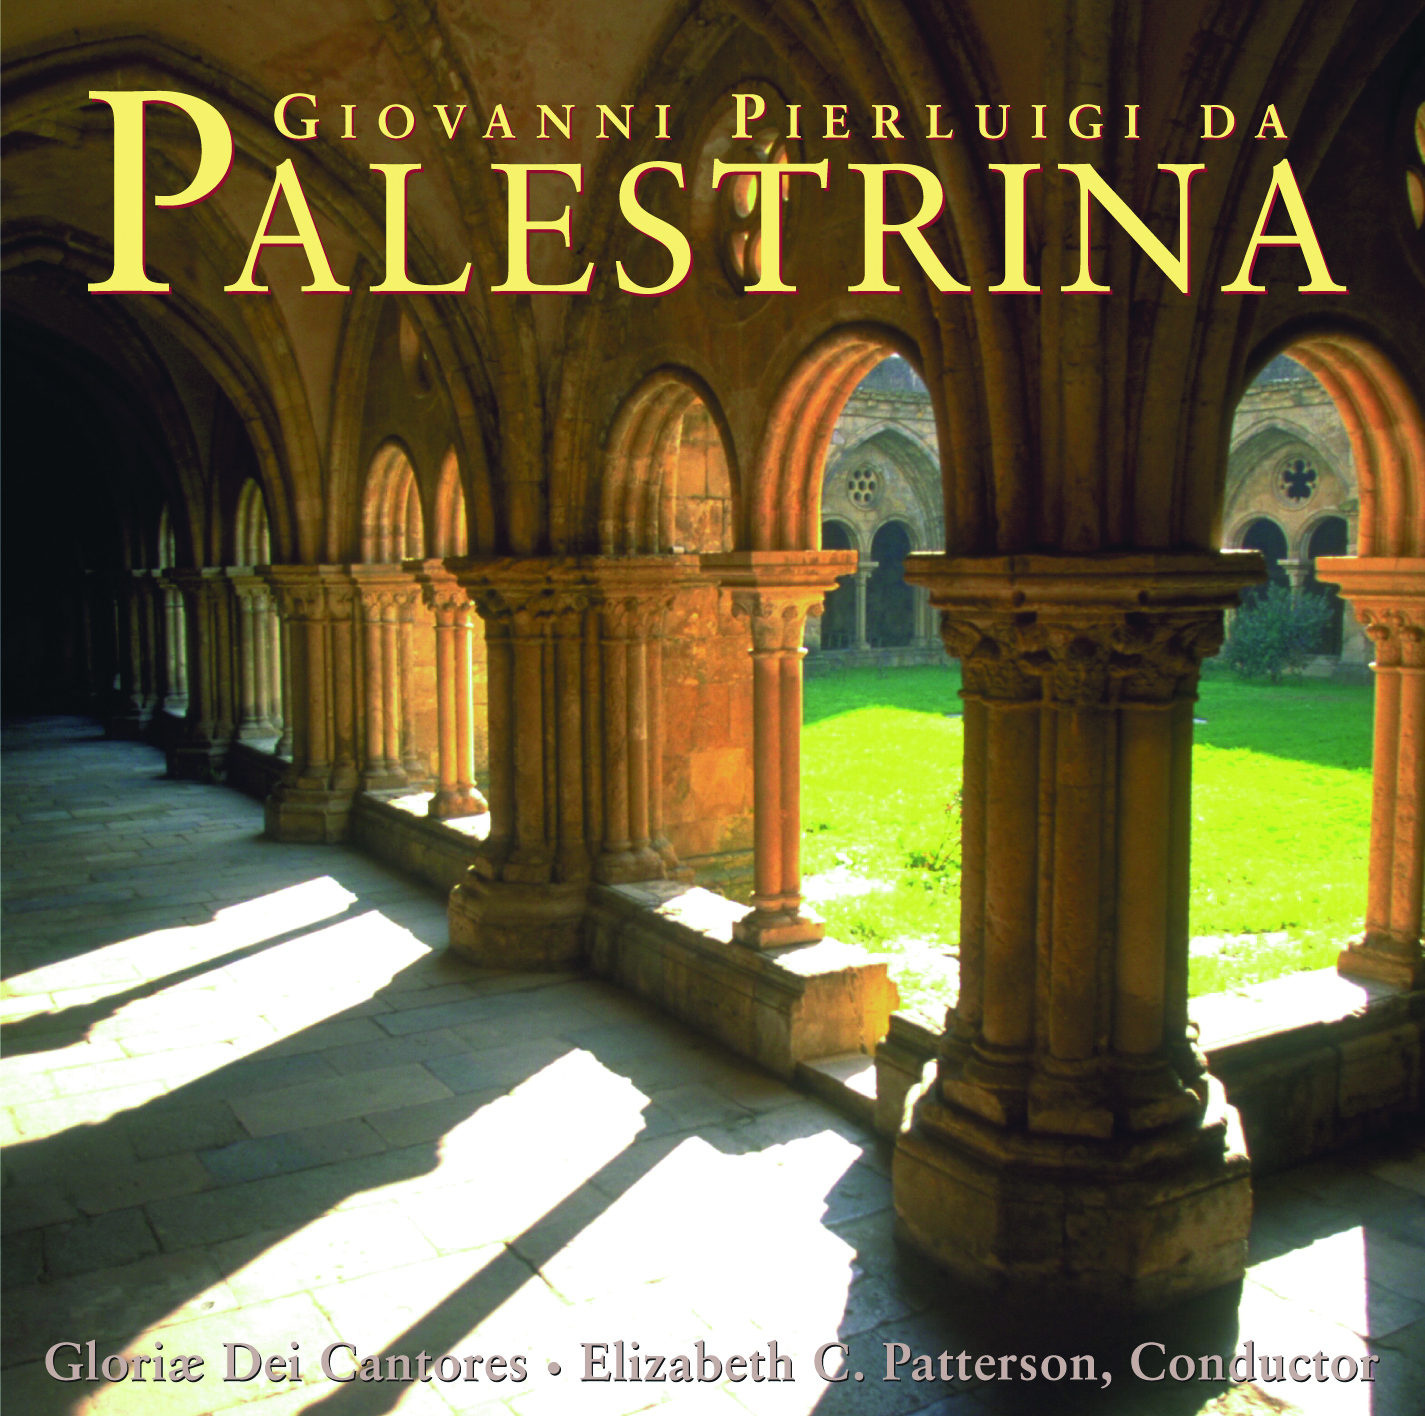 product image of 'Palestrina' Gloriae Dei Cantores choral recording